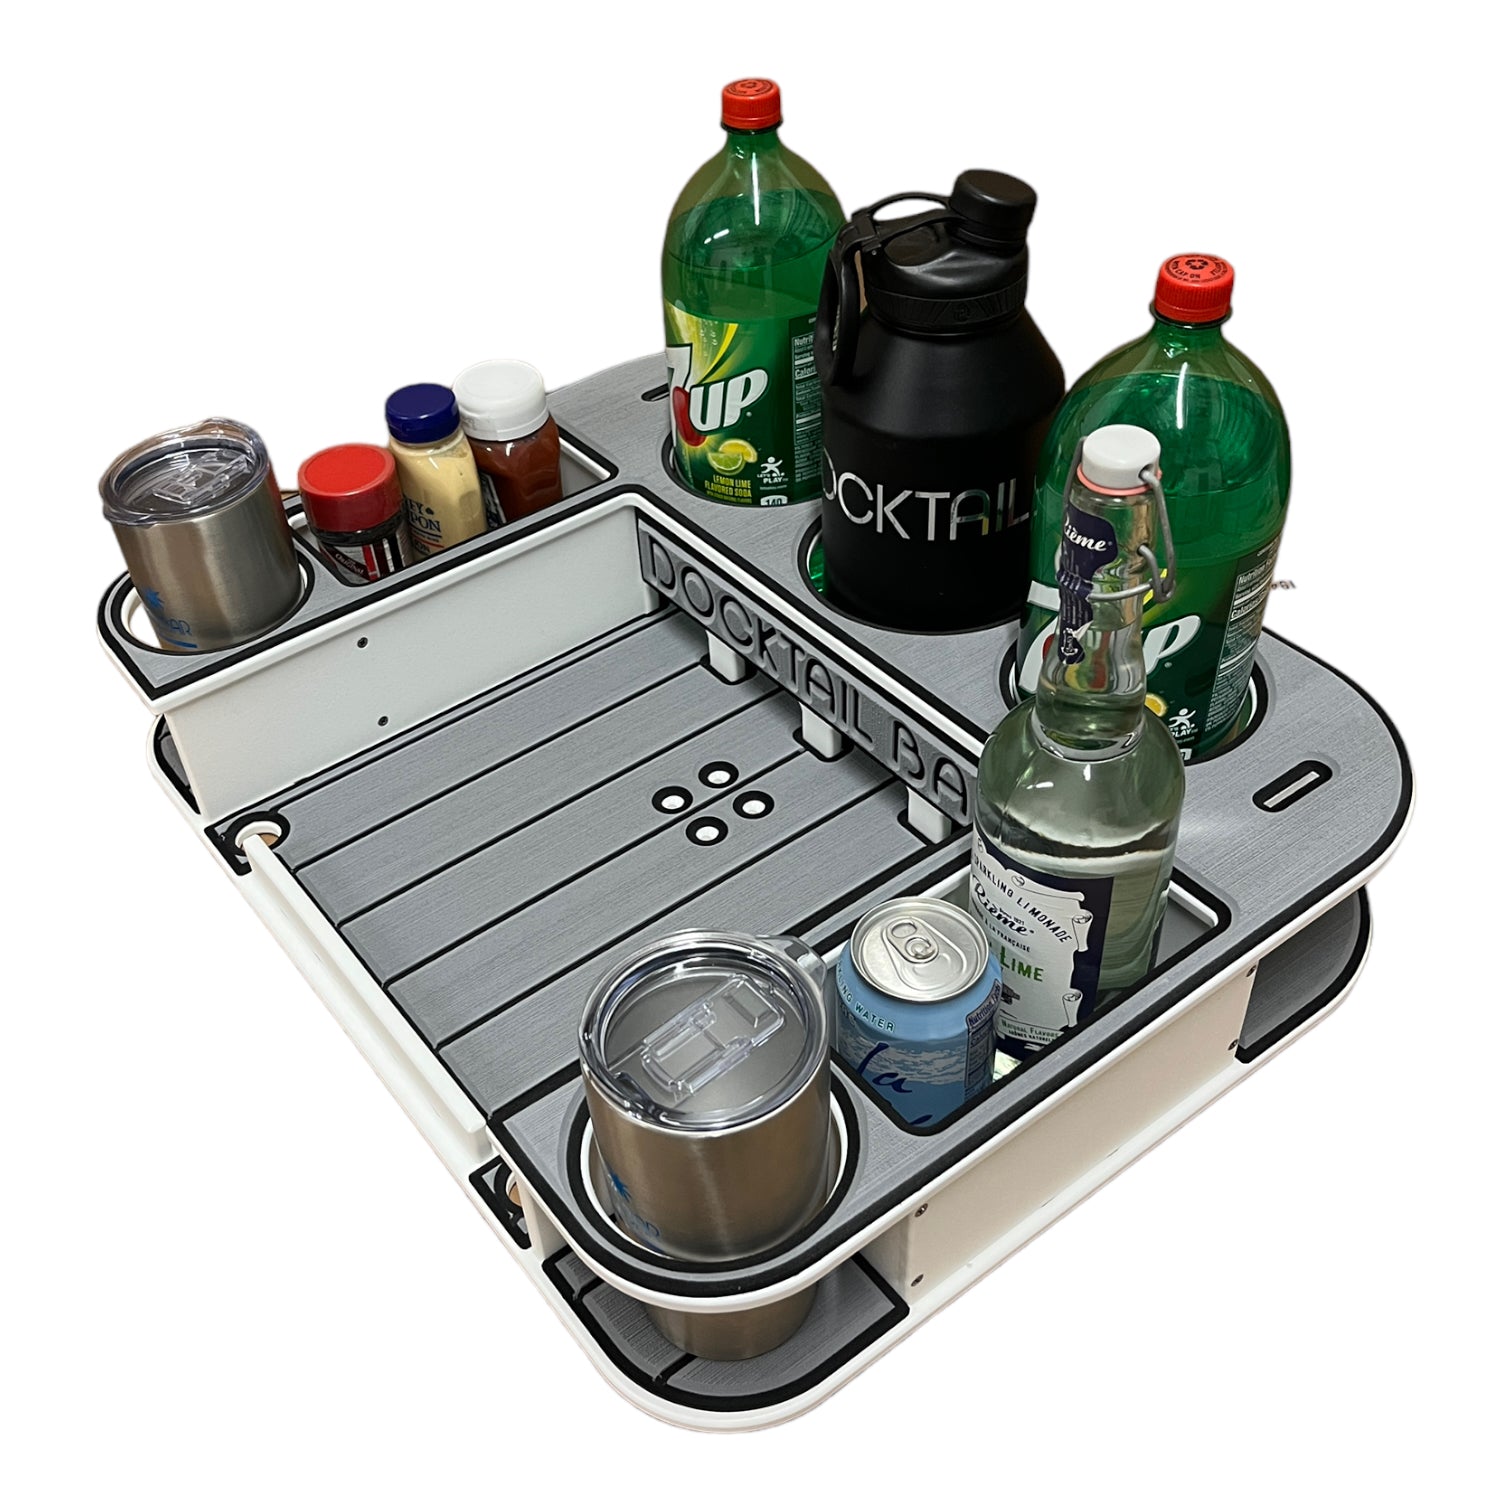 Docktail Butler Marine Food and Cocktail Table - Includes Adjustable Folding Rod Holder Mount - Large Serving Tray for Grill and Boat Cup.